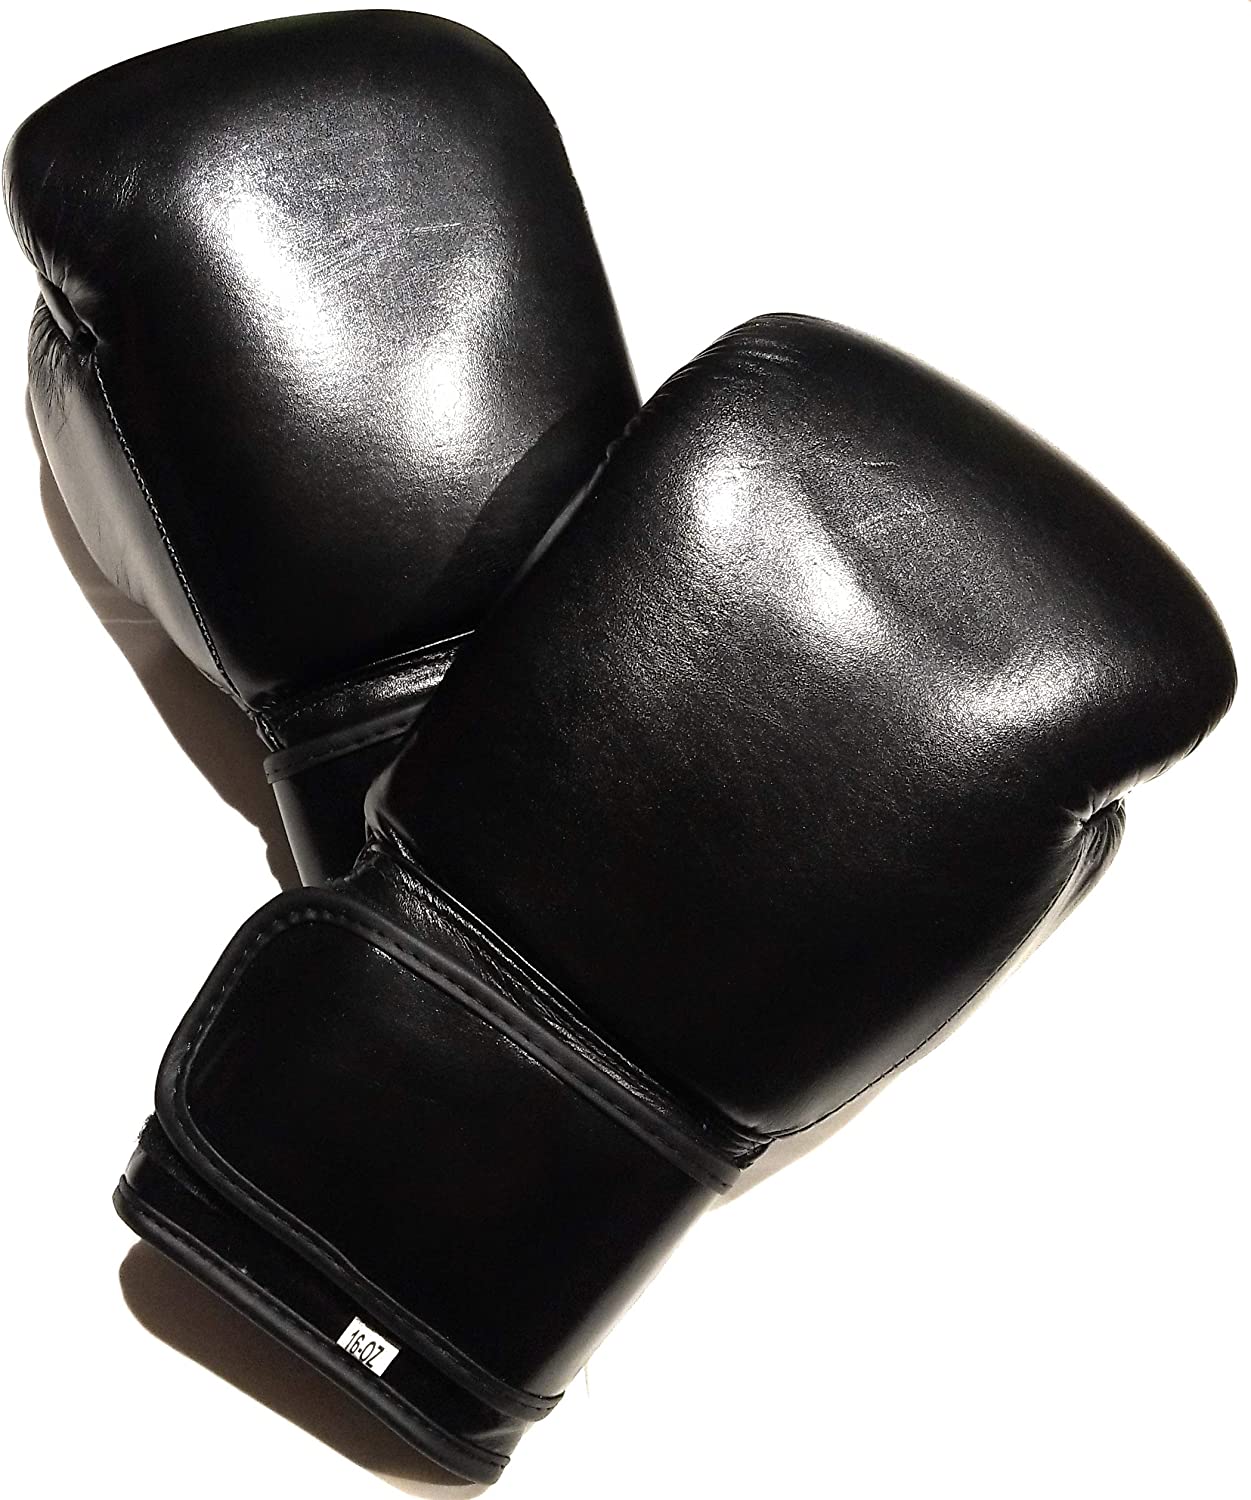 Boxing Glove to Grade in leather Black color - Woldorf USA INC